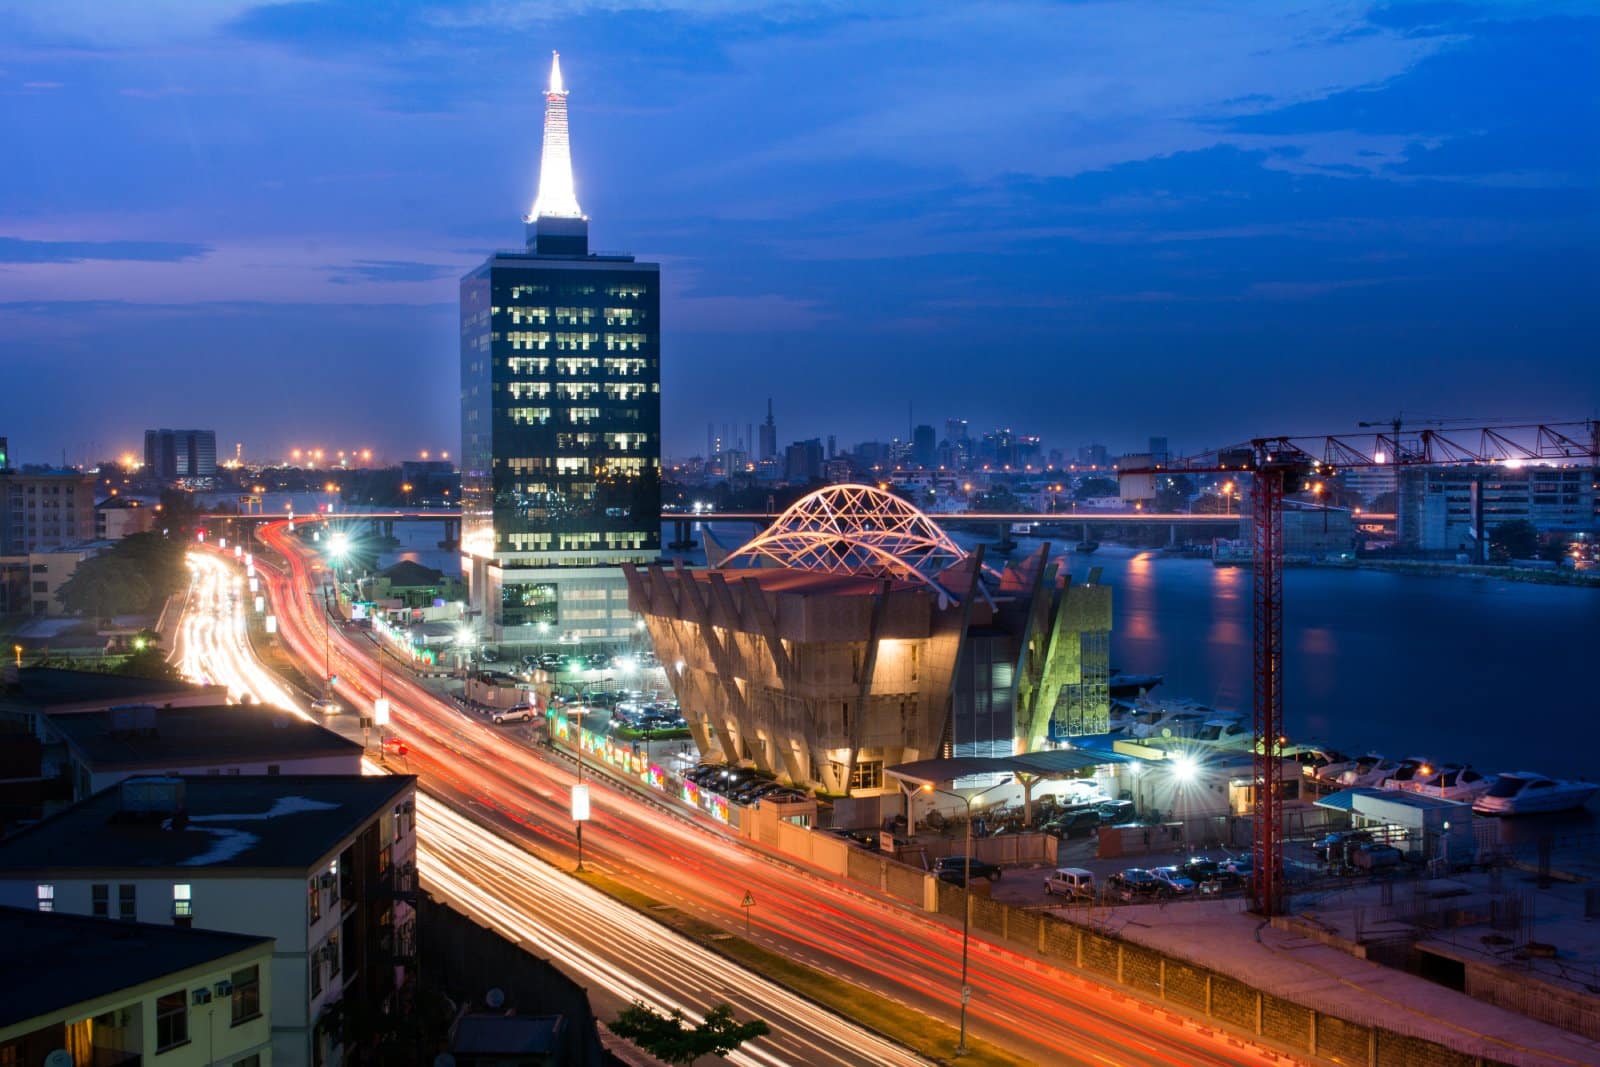 <p class="wp-caption-text">Image Credit: Shutterstock / ba55ey</p>  <p><span>Lagos, the vibrant heart of Nigeria, is a city of stark contrasts and relentless energy. It is where traditional markets coexist with luxury shopping malls and serene beaches border bustling urban neighborhoods. The city’s music scene is a powerful expression of Nigerian culture, with Afrobeats echoing through the lively nightclubs and beachfront bars.</span></p> <p><span>Lagos is also a center for Nollywood, Nigeria’s booming film industry, which has gained international acclaim. The city’s art scene is vibrant, with spaces like the Nike Art Gallery showcasing the work of local artists.</span></p> <p><span>For a taste of Lagos’ culinary diversity, a visit to one of the city’s many markets, such as the Lekki Market, offers an array of local and international flavors. Despite its challenges, Lagos captivates with its dynamic spirit, rich cultural landscape, and the resilience of its people.</span></p> <p><b>Insider’s Tip:</b><span> Experience the city’s nightlife in Ikeja, where live music venues offer an authentic taste of Nigerian music.</span></p> <p><b>When to Travel:</b><span> The dry season from November to March is the best time to visit.</span></p> <p><b>How to Get There:</b><span> Murtala Muhammed International Airport serves as Lagos’s main entry point. Taxis and ride-sharing services are the most convenient ways to get around.</span></p>